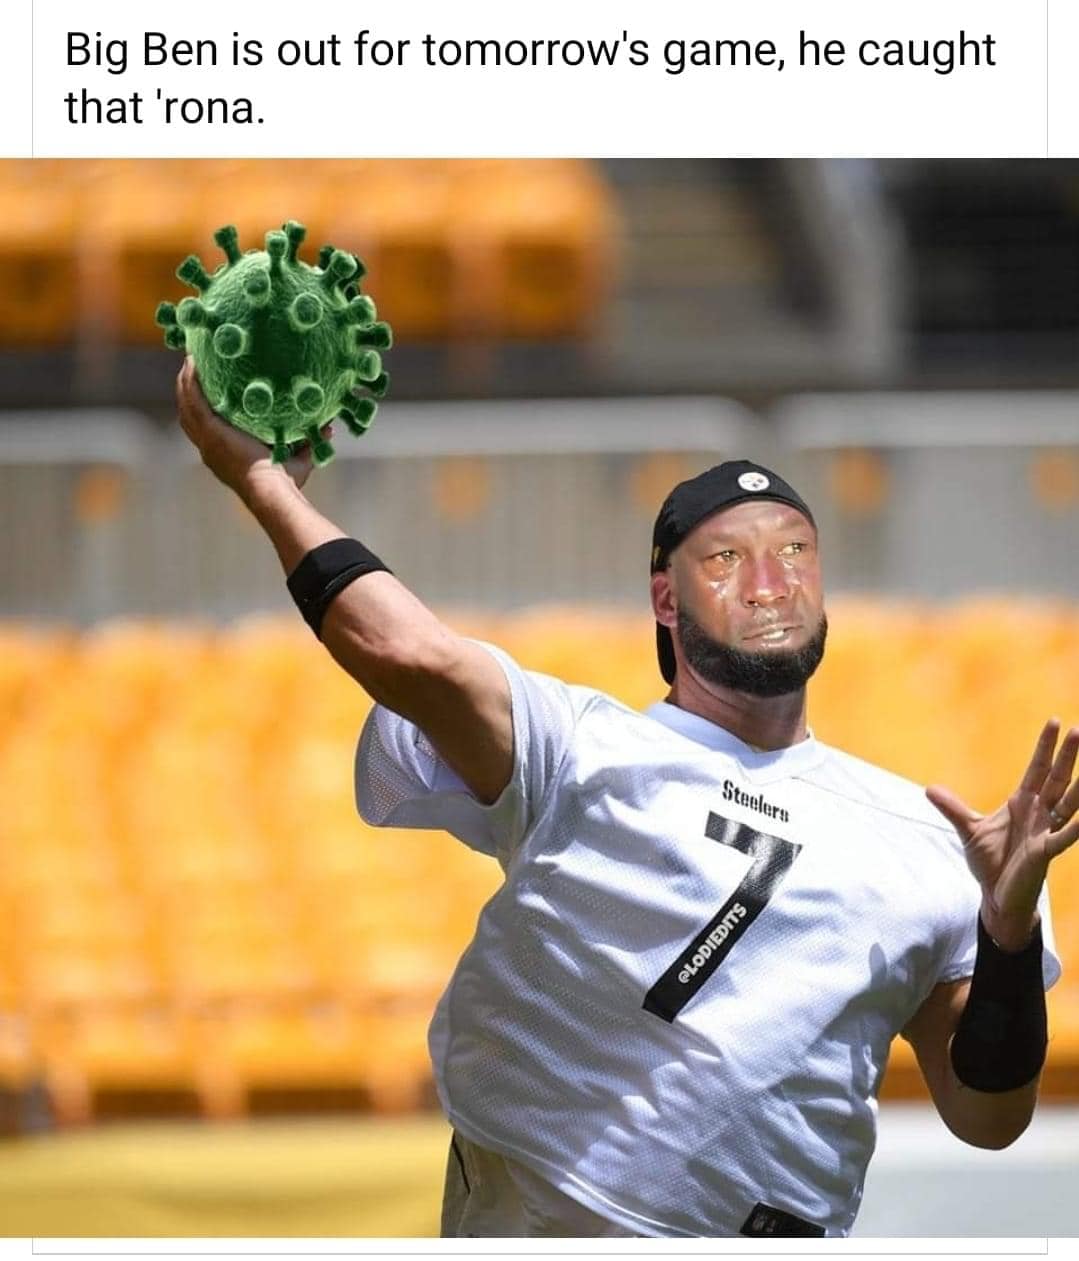 Big Ben is out for tomorrow's game, he caught that 'rona.